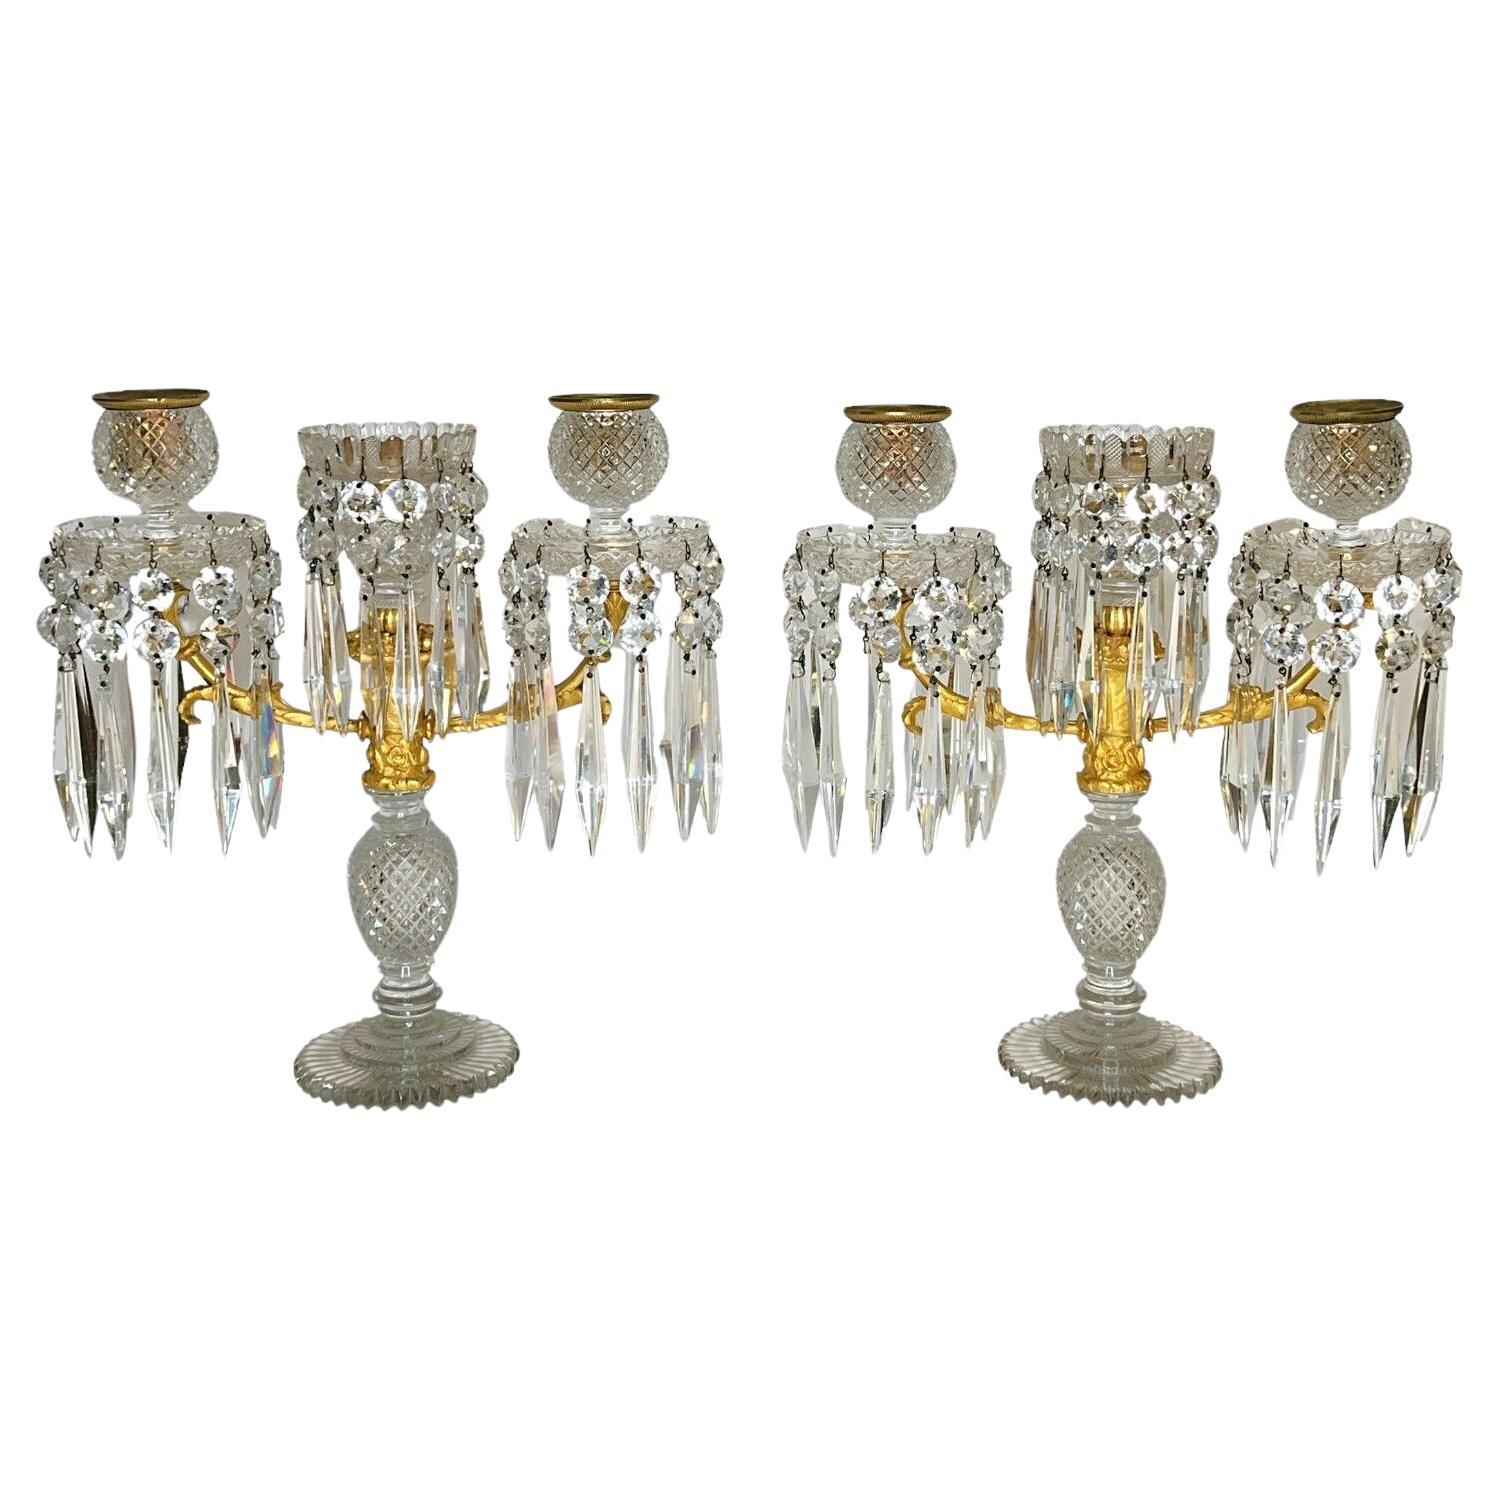 A Pair Of English Regency Ormolu and Cut Glass Candelabra, attributed to Blades For Sale